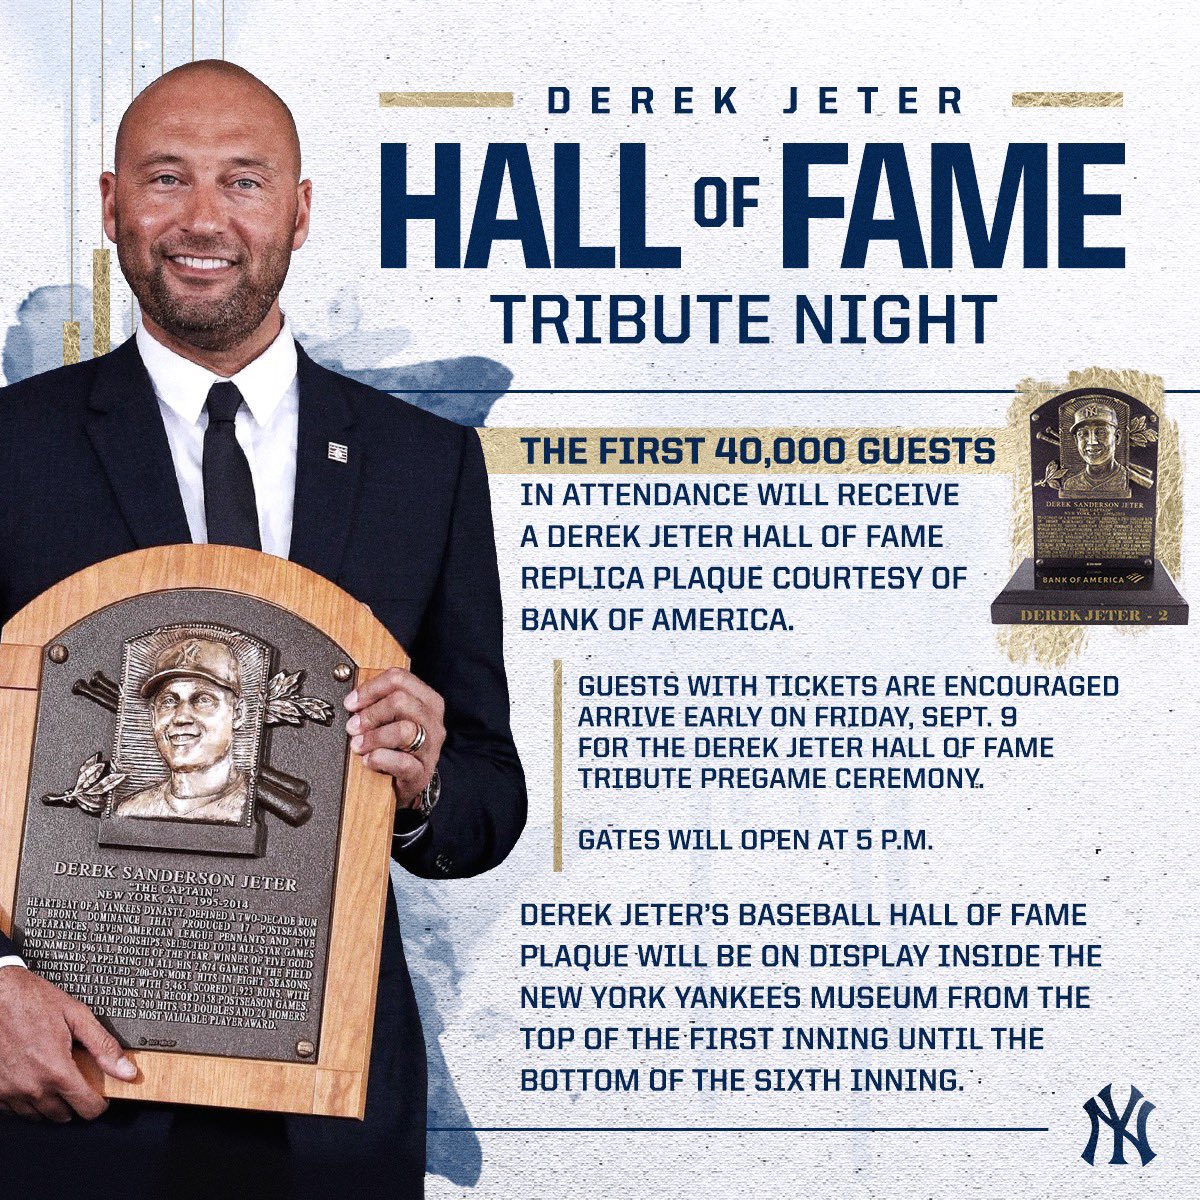 New York Yankees on X: Gates will open at 5pm for tonight's game. We ask  fans to be seated by 6:30pm for tonight's Derek Jeter Hall of Fame Tribute  Ceremony.  /